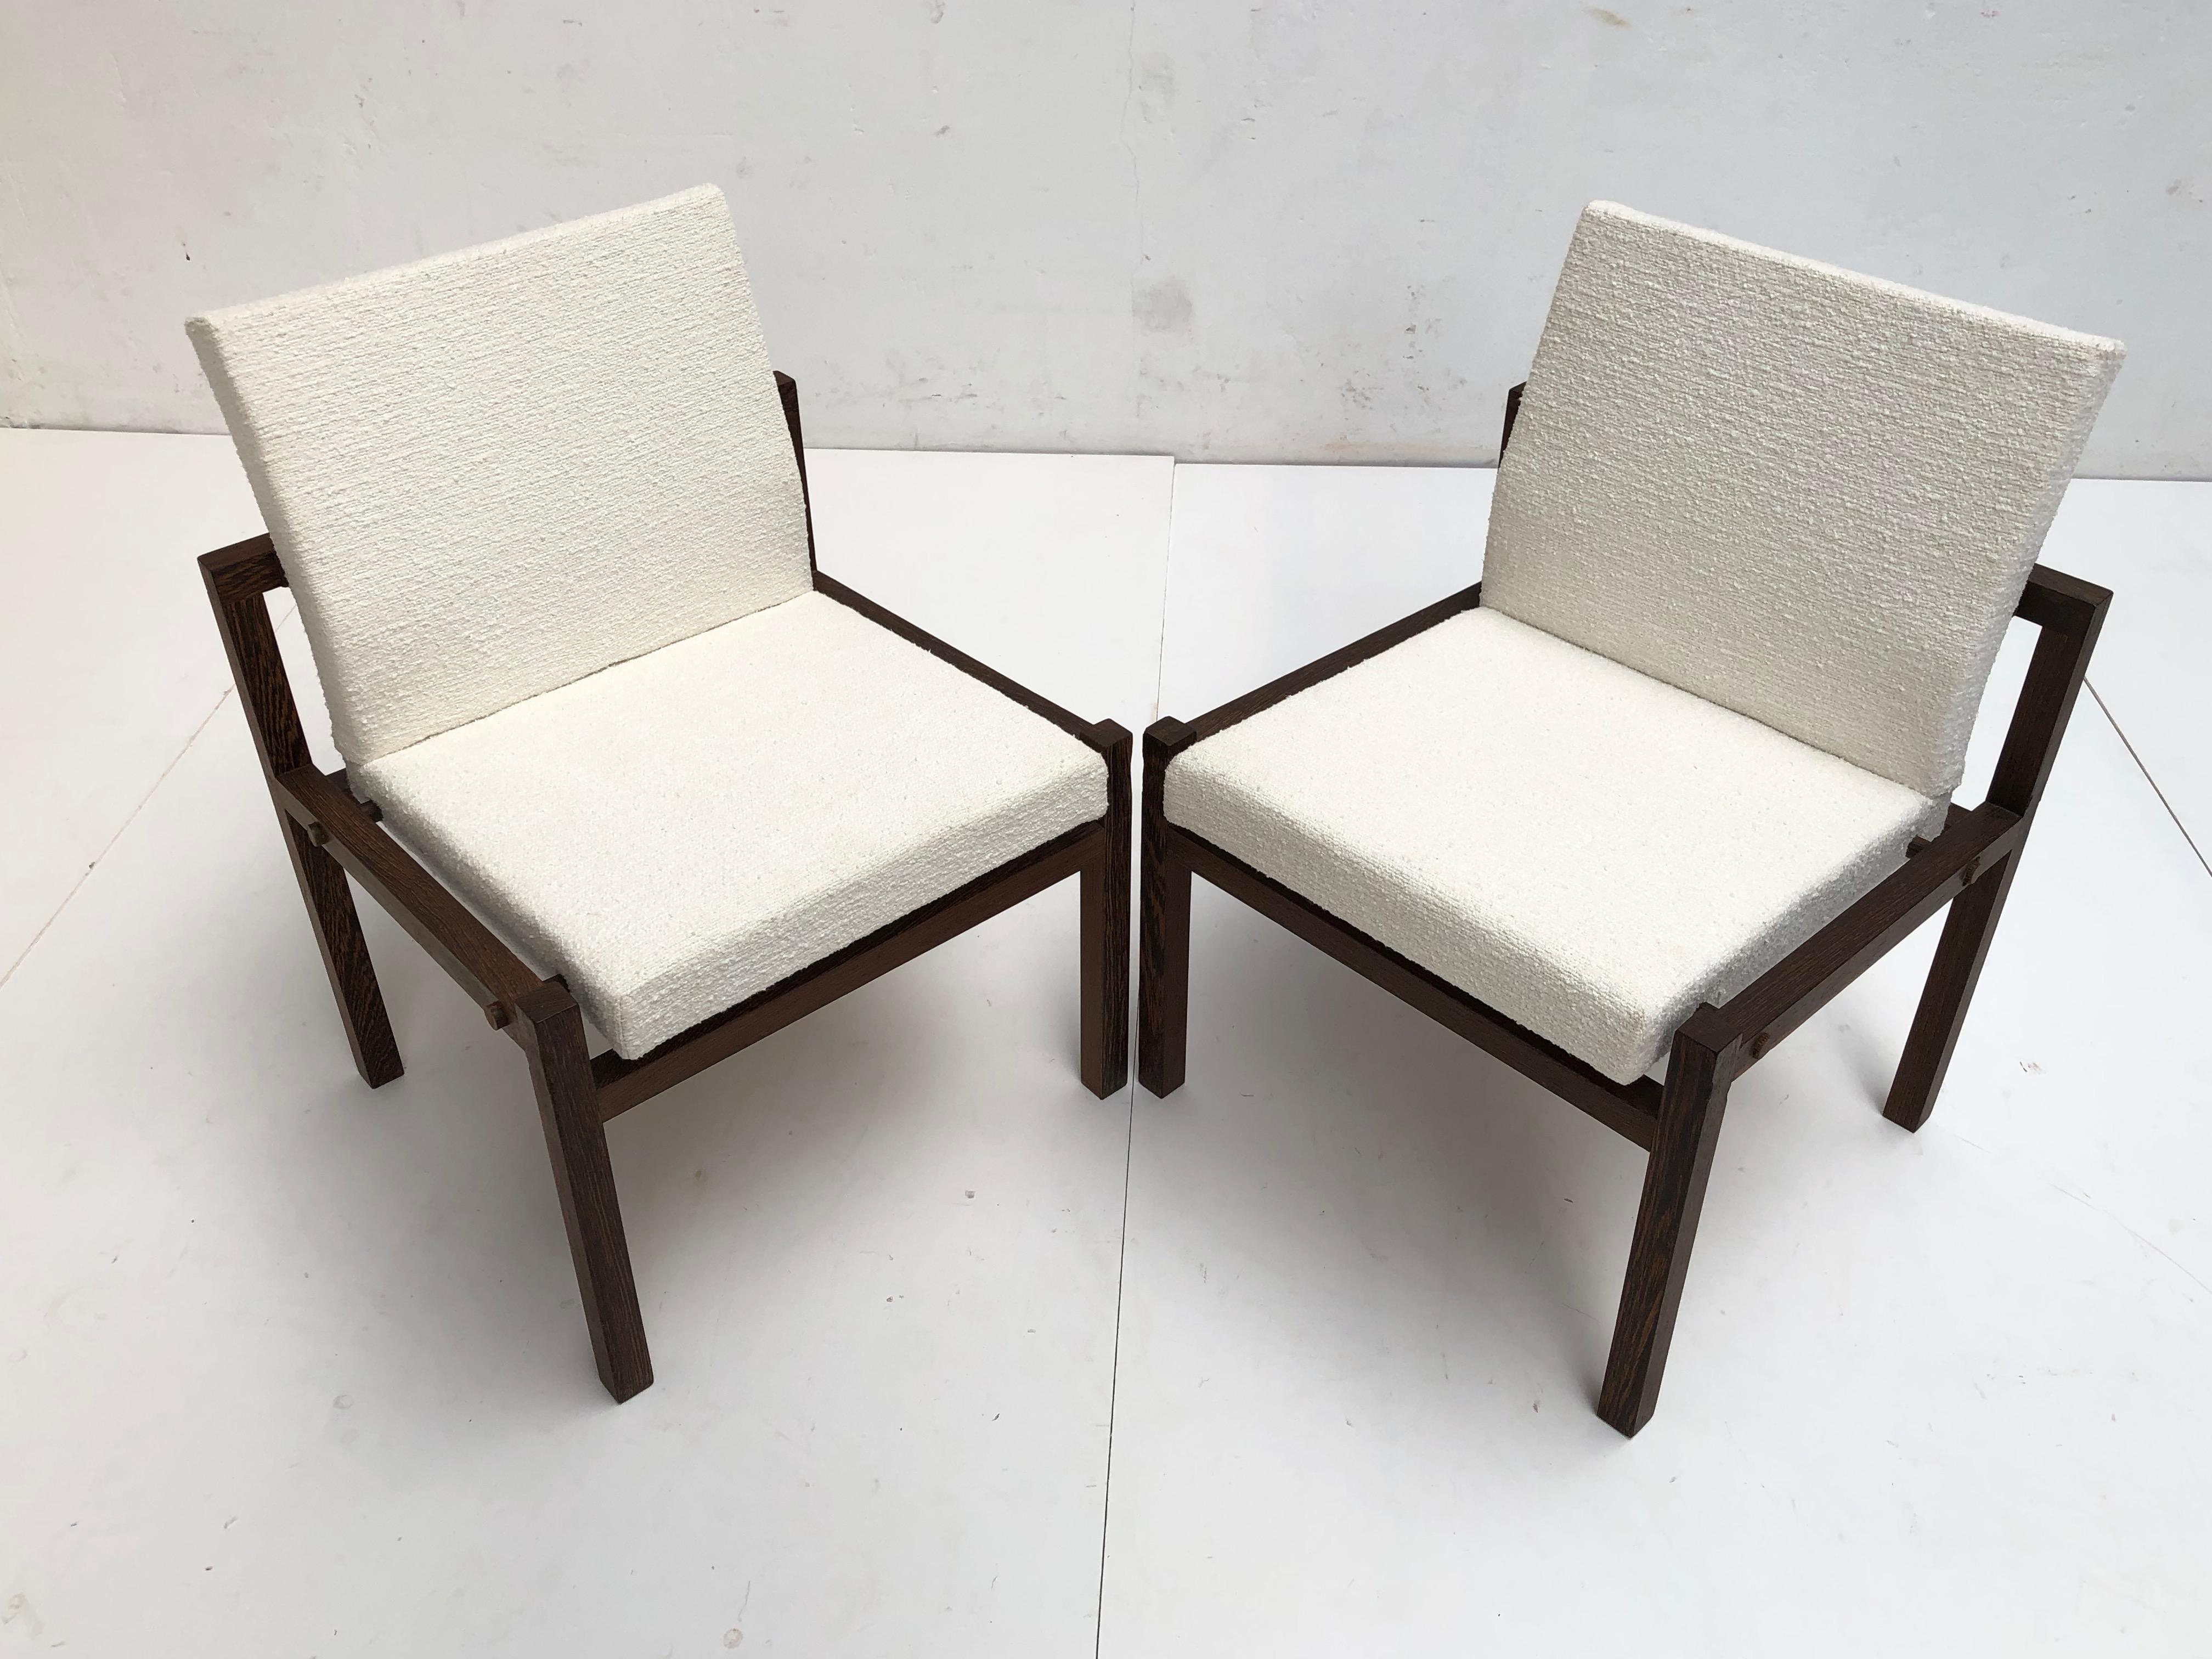 Dutch 1960s Lounge Chairs in Solid Wenge Wood and New Pure Wool Upholstery For Sale 5